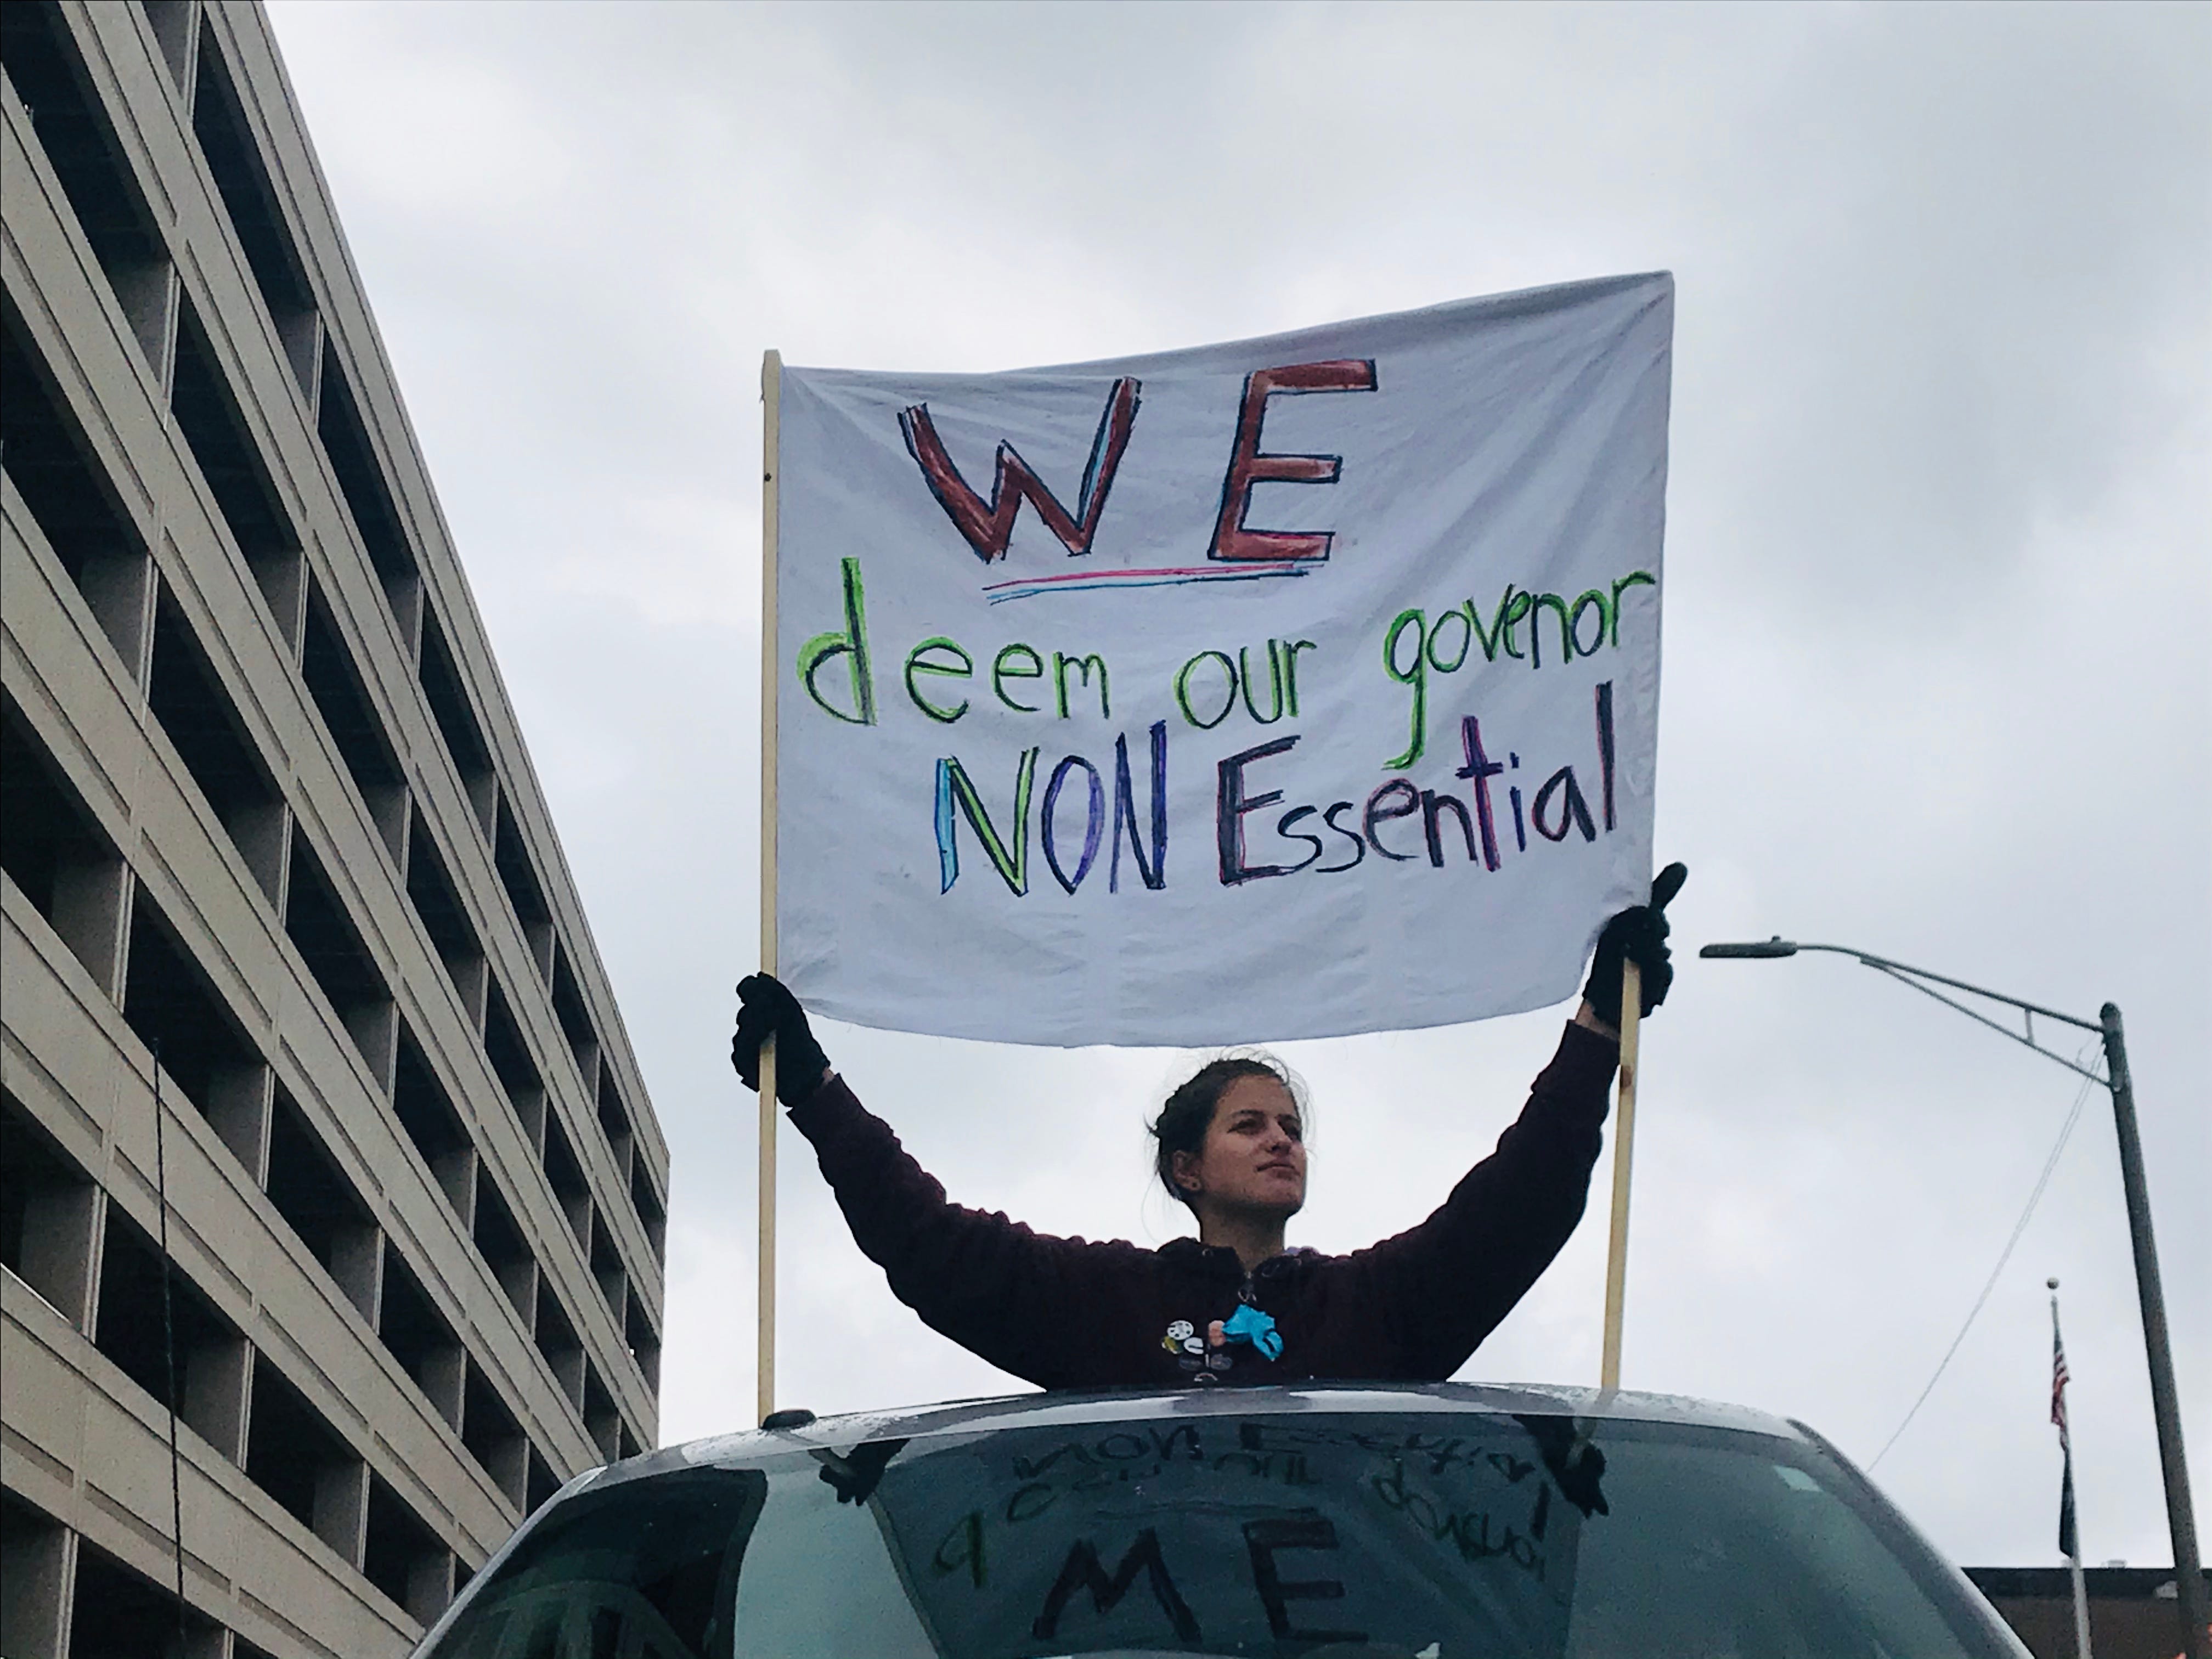 An unnamed protester holds a sign against Gov. Gretchen Whitmer during a demonstration on Wednesday, April 15, 2020. Hundreds of protesters gathered at the Capitol to voice their frustration with Whitmer's stay-at-home order.